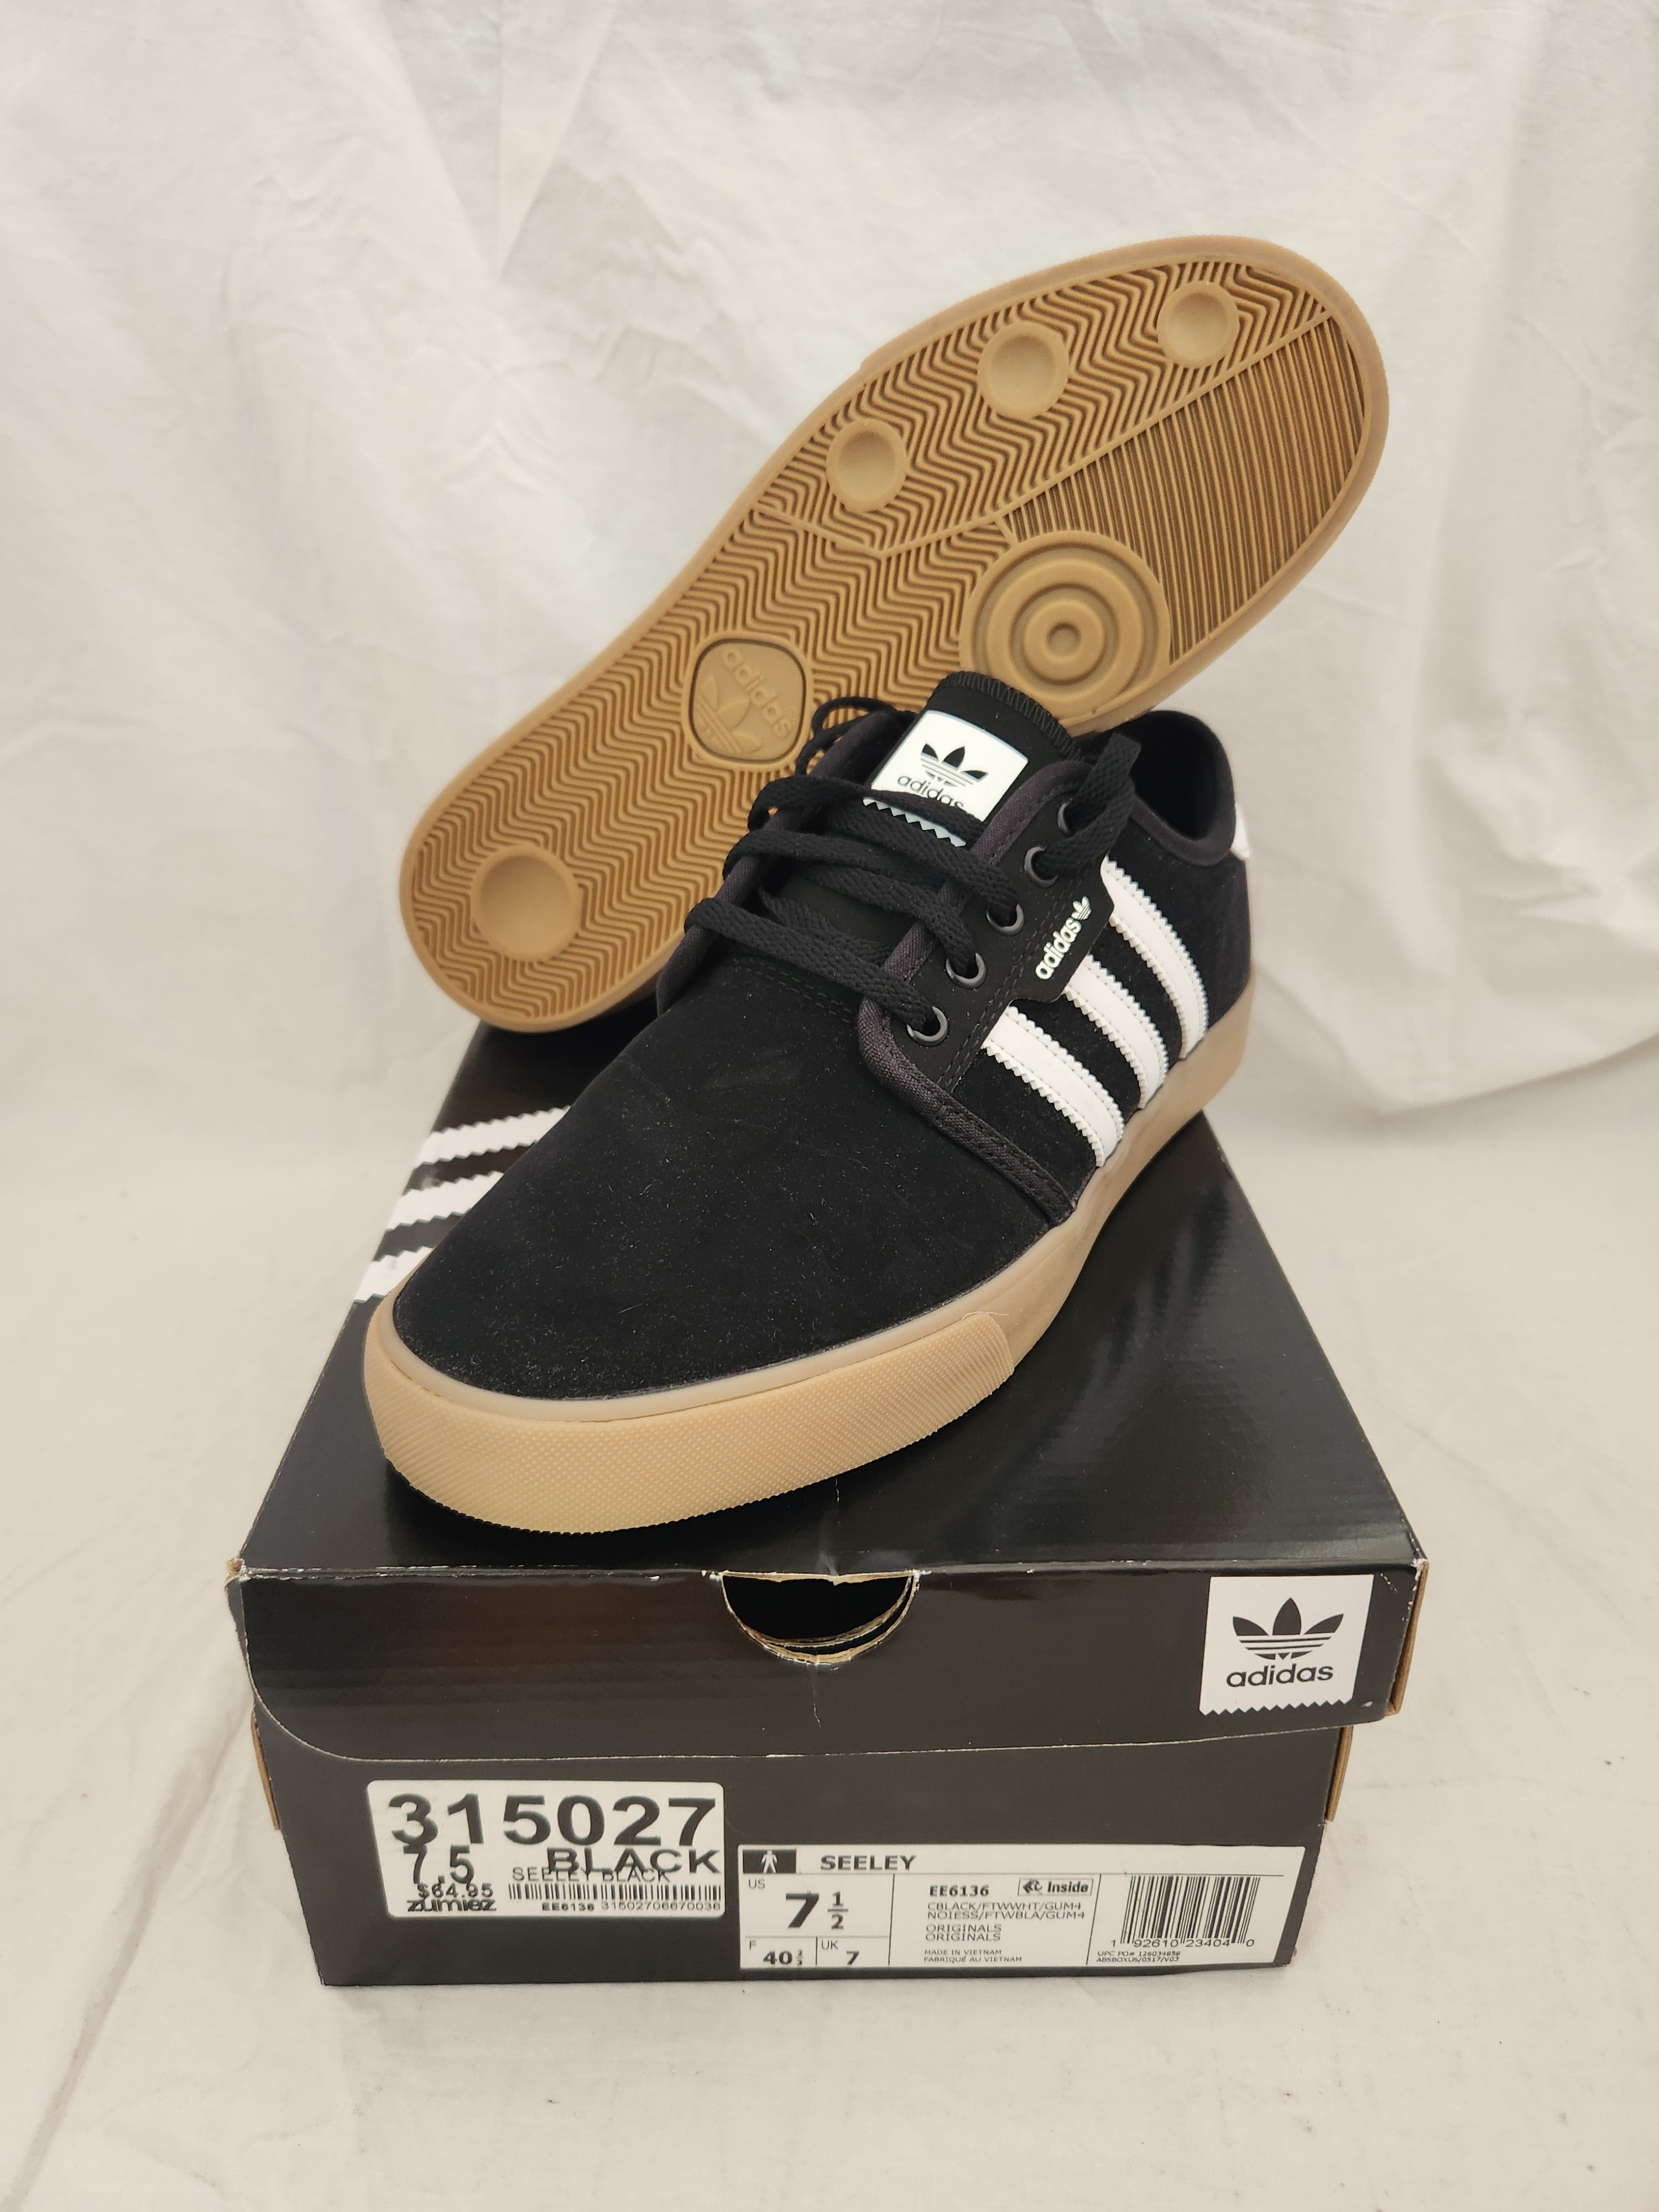 Adidas Sneakers Seeley Shoes Black Leather Womens ⋆ Drzubedatumbi | Adidas  Different Types Of Shoes | suturasonline.com.br